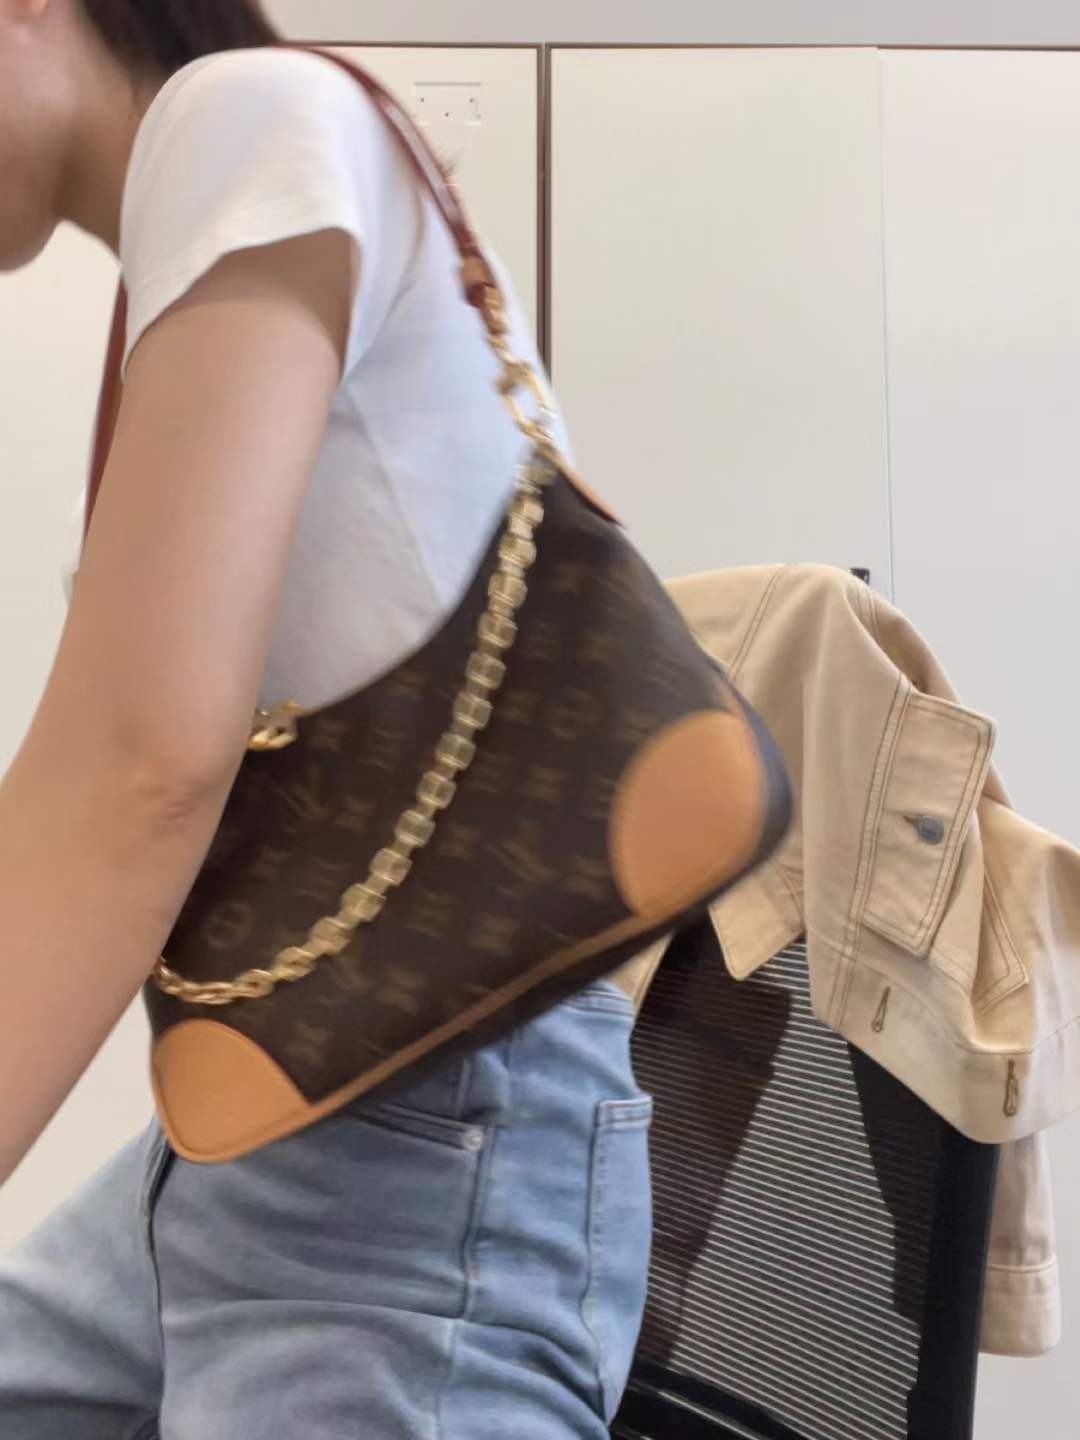 Louis Vuitton M45832 croissant with yellow leather Boulogne top replica handbags Upper body effect (2022 Updated)-Best Quality Fake Louis Vuitton Bag Online Store, Replica designer bag ru